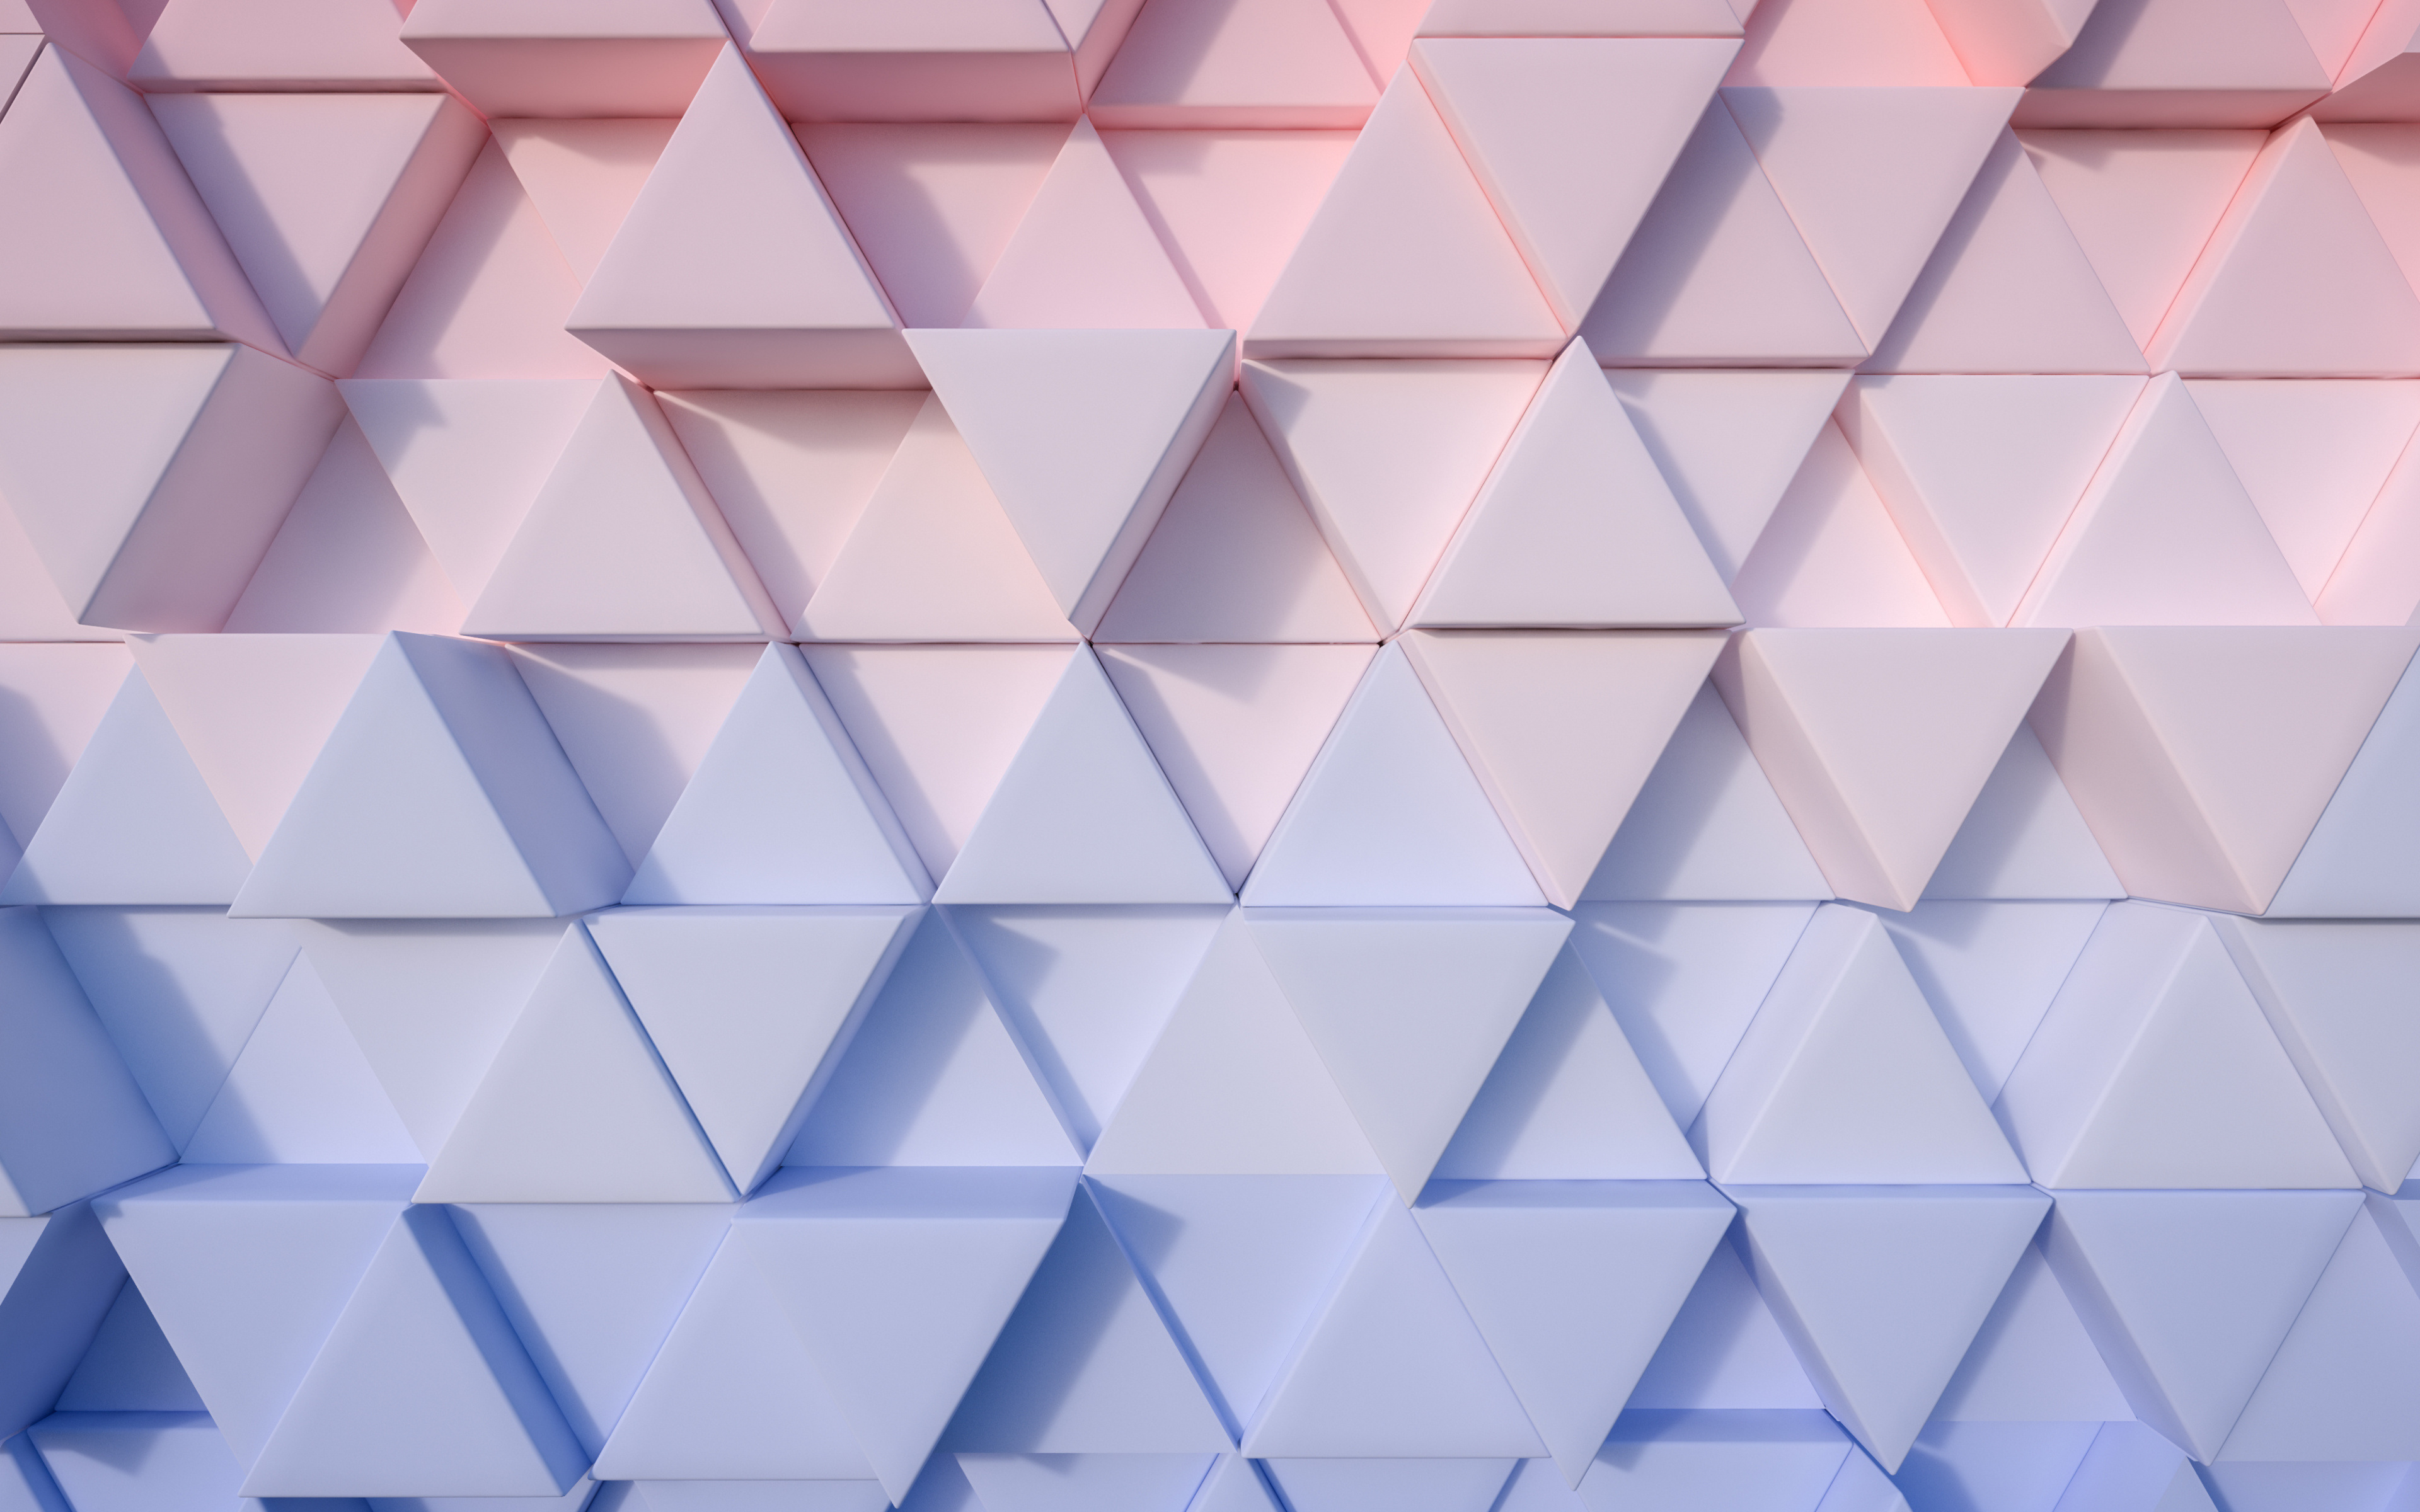 Download 3840x2400 wallpaper triangles, abstract, geometrical shape